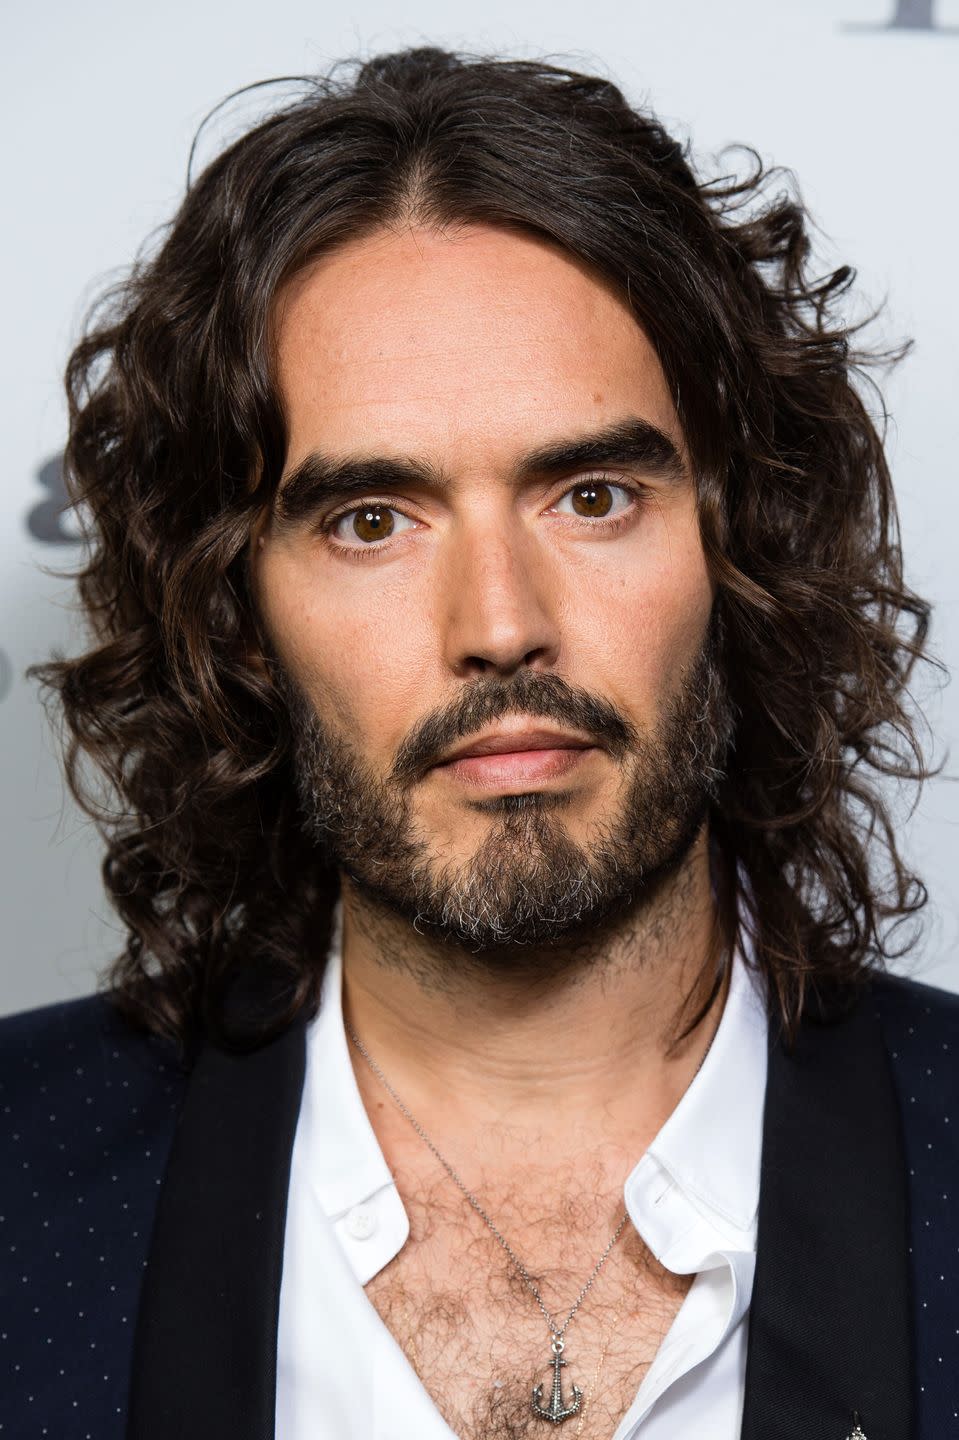 russell brand pictured in 2017, he has long hair and a beard and looks into the camera